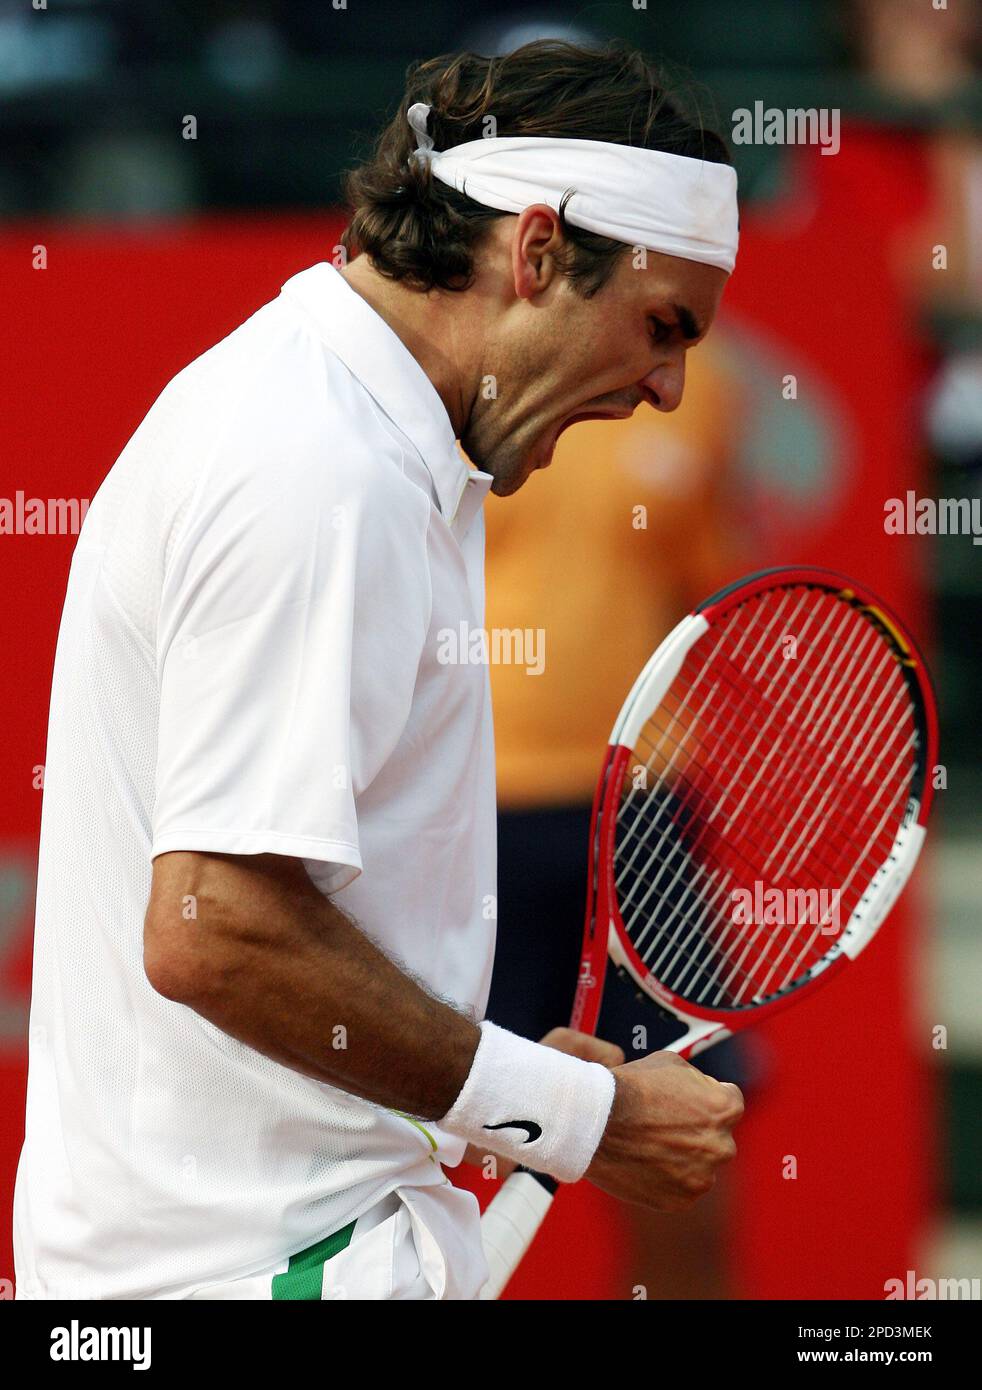 Switzerland's Roger Federer reacts after winning a point to Spain's Nicolas  Almagro during the quarterfinals of the Rome Masters tennis tournament, in  Rome, Friday, May 12, 2006. Federer won the match 6-3,